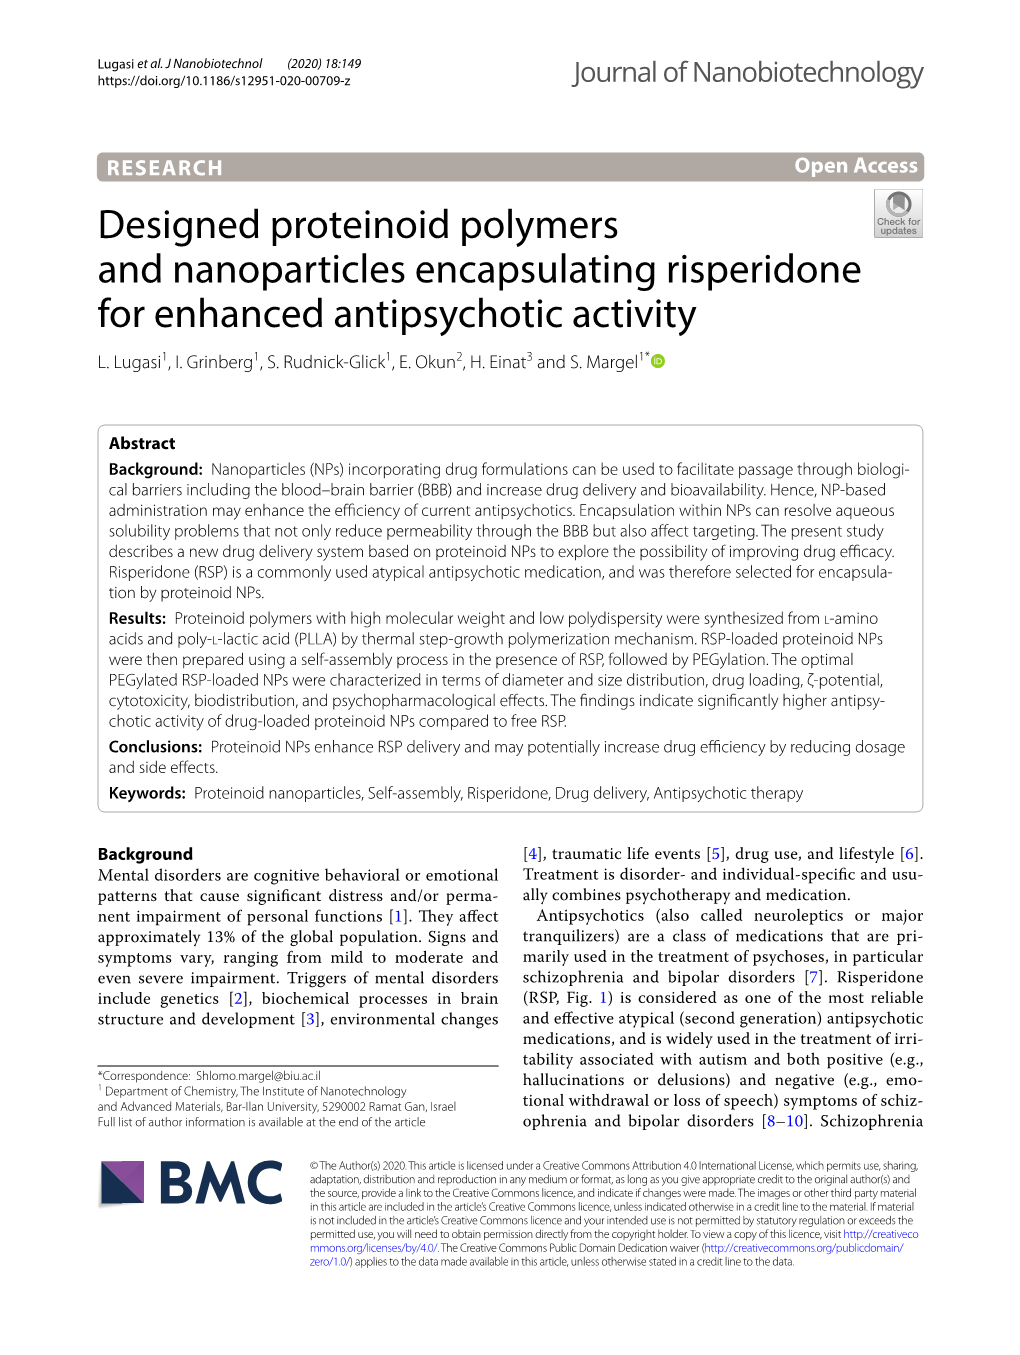 Designed Proteinoid Polymers and Nanoparticles Encapsulating Risperidone for Enhanced Antipsychotic Activity L